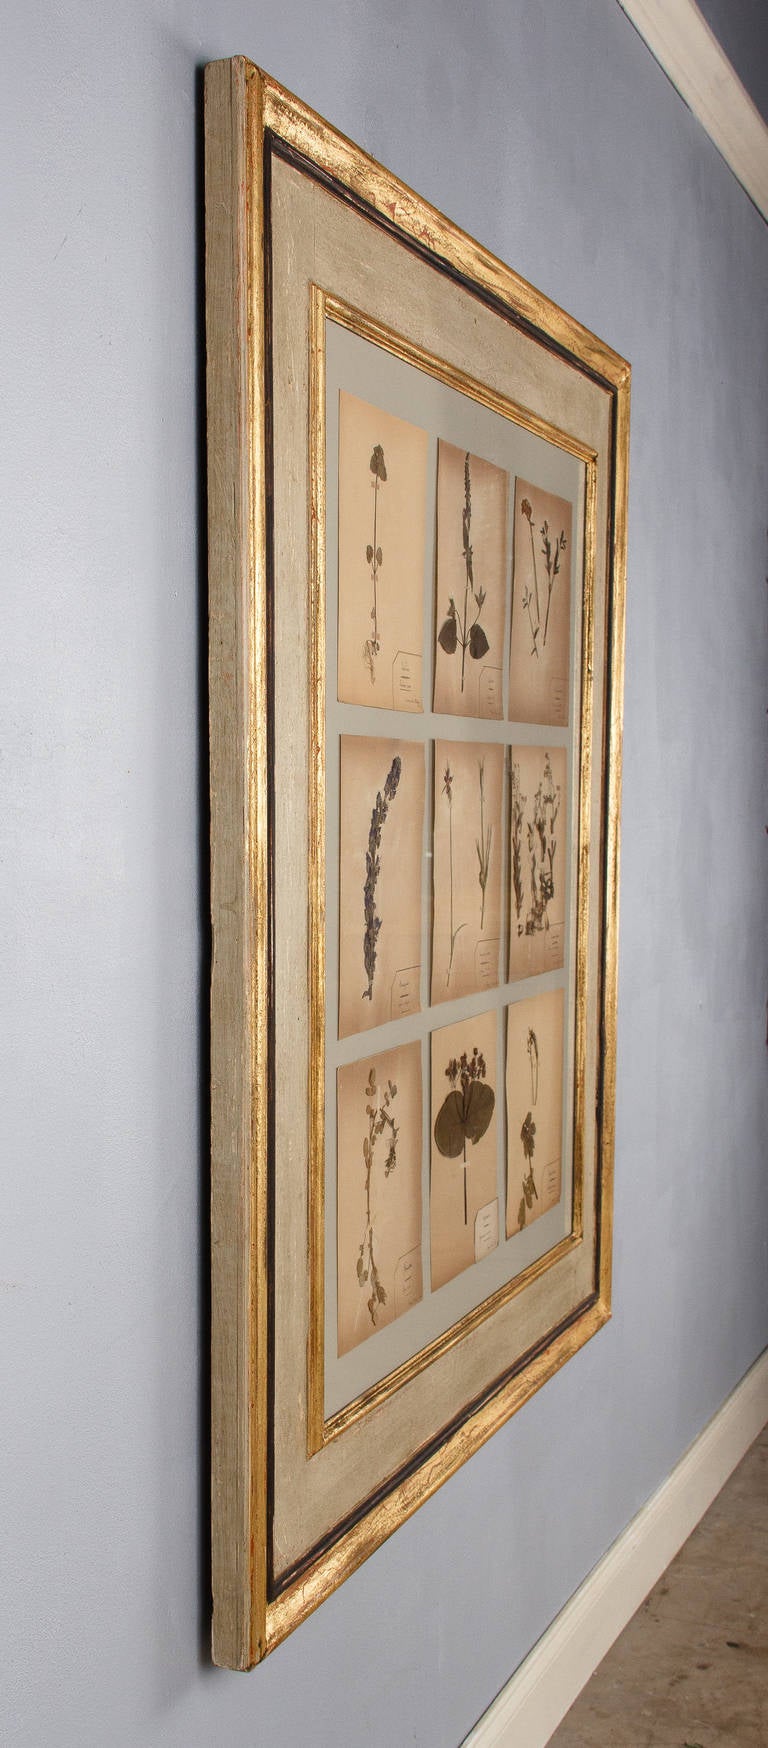 A wonderful large painted wooden frame filled with French Herbaria. The frame is painted in gold and light grey tones with a black trim and contains nine pressed botanicals from a private collection and all date to the year 1930.